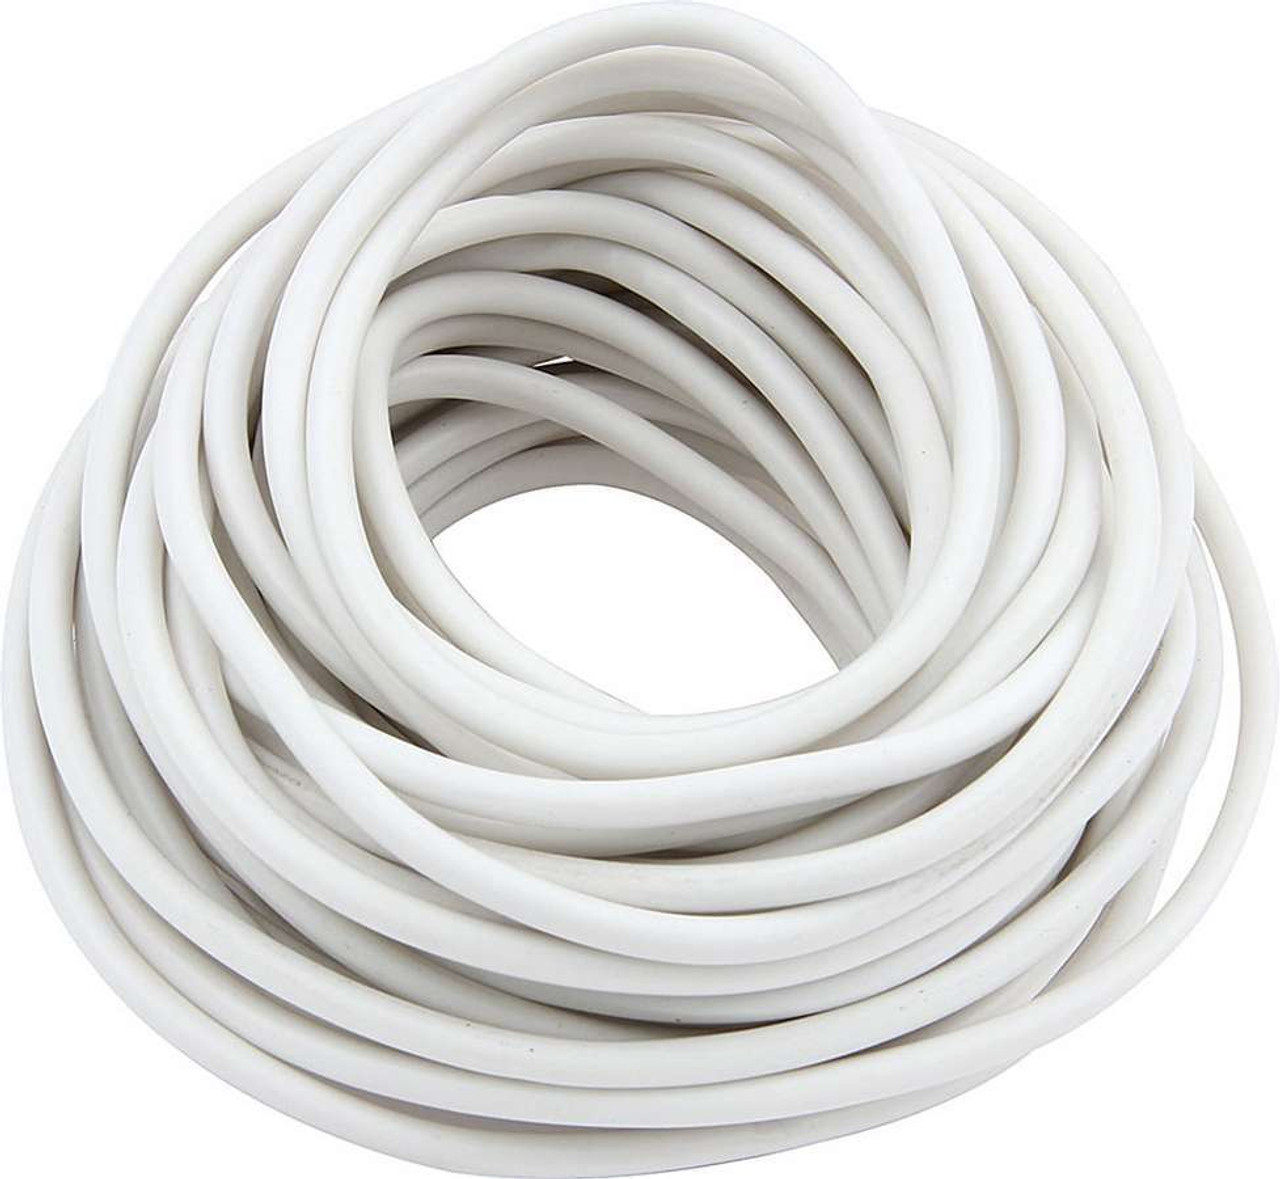 20 AWG White Primary Wire 50ft